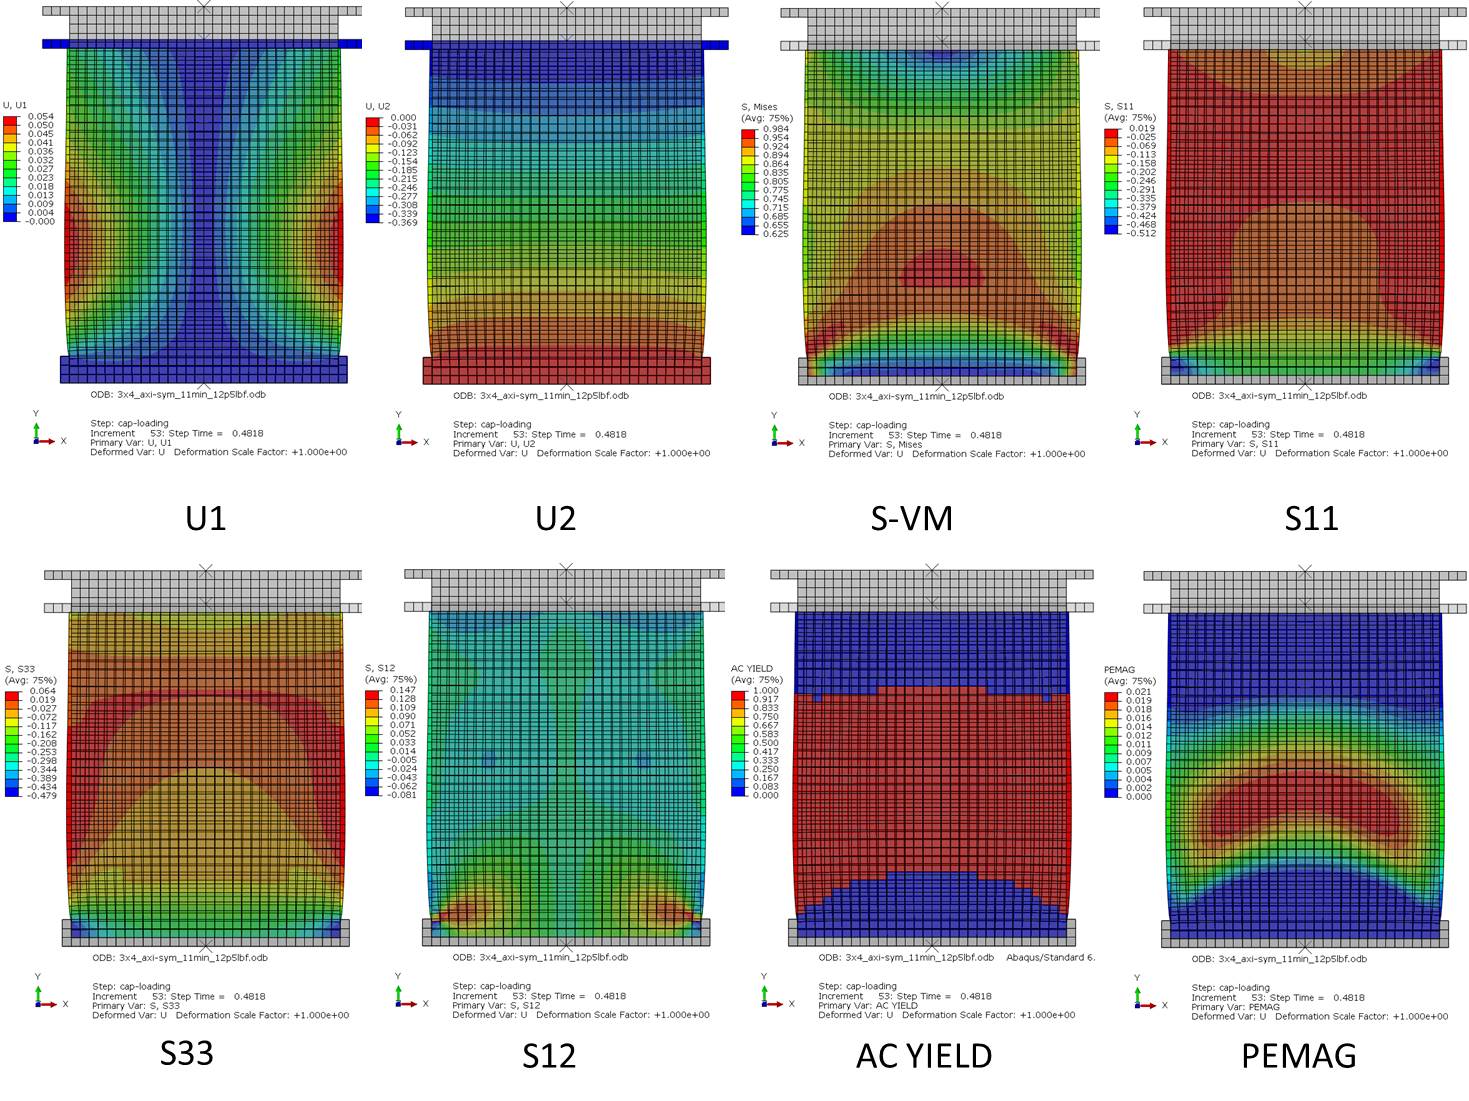 Numerical simulations of fresh mortar specimens loaded in axial compression at specific mortar maturities. The finite element analyses use the linear Drucker-Prager elasto-plastic model (Step-Time=0.48)